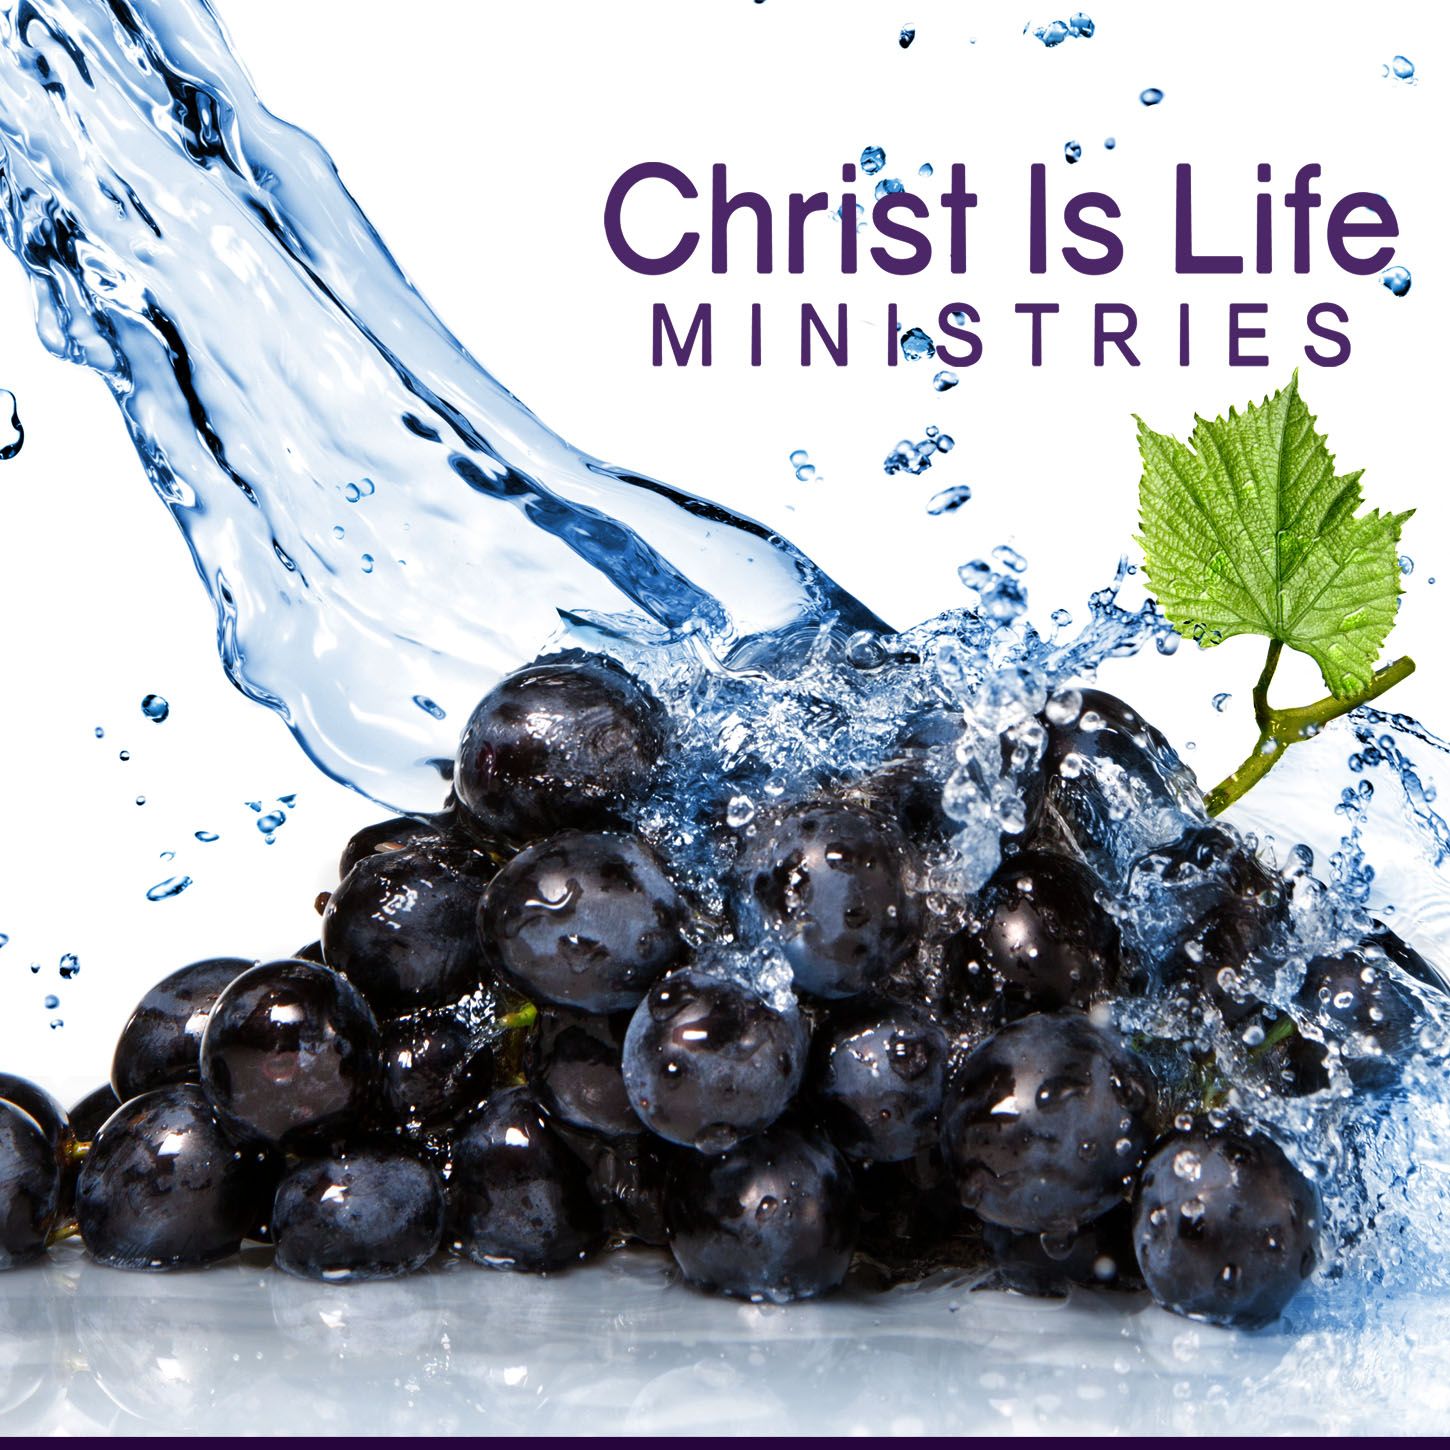 Christ Is Life Ministries